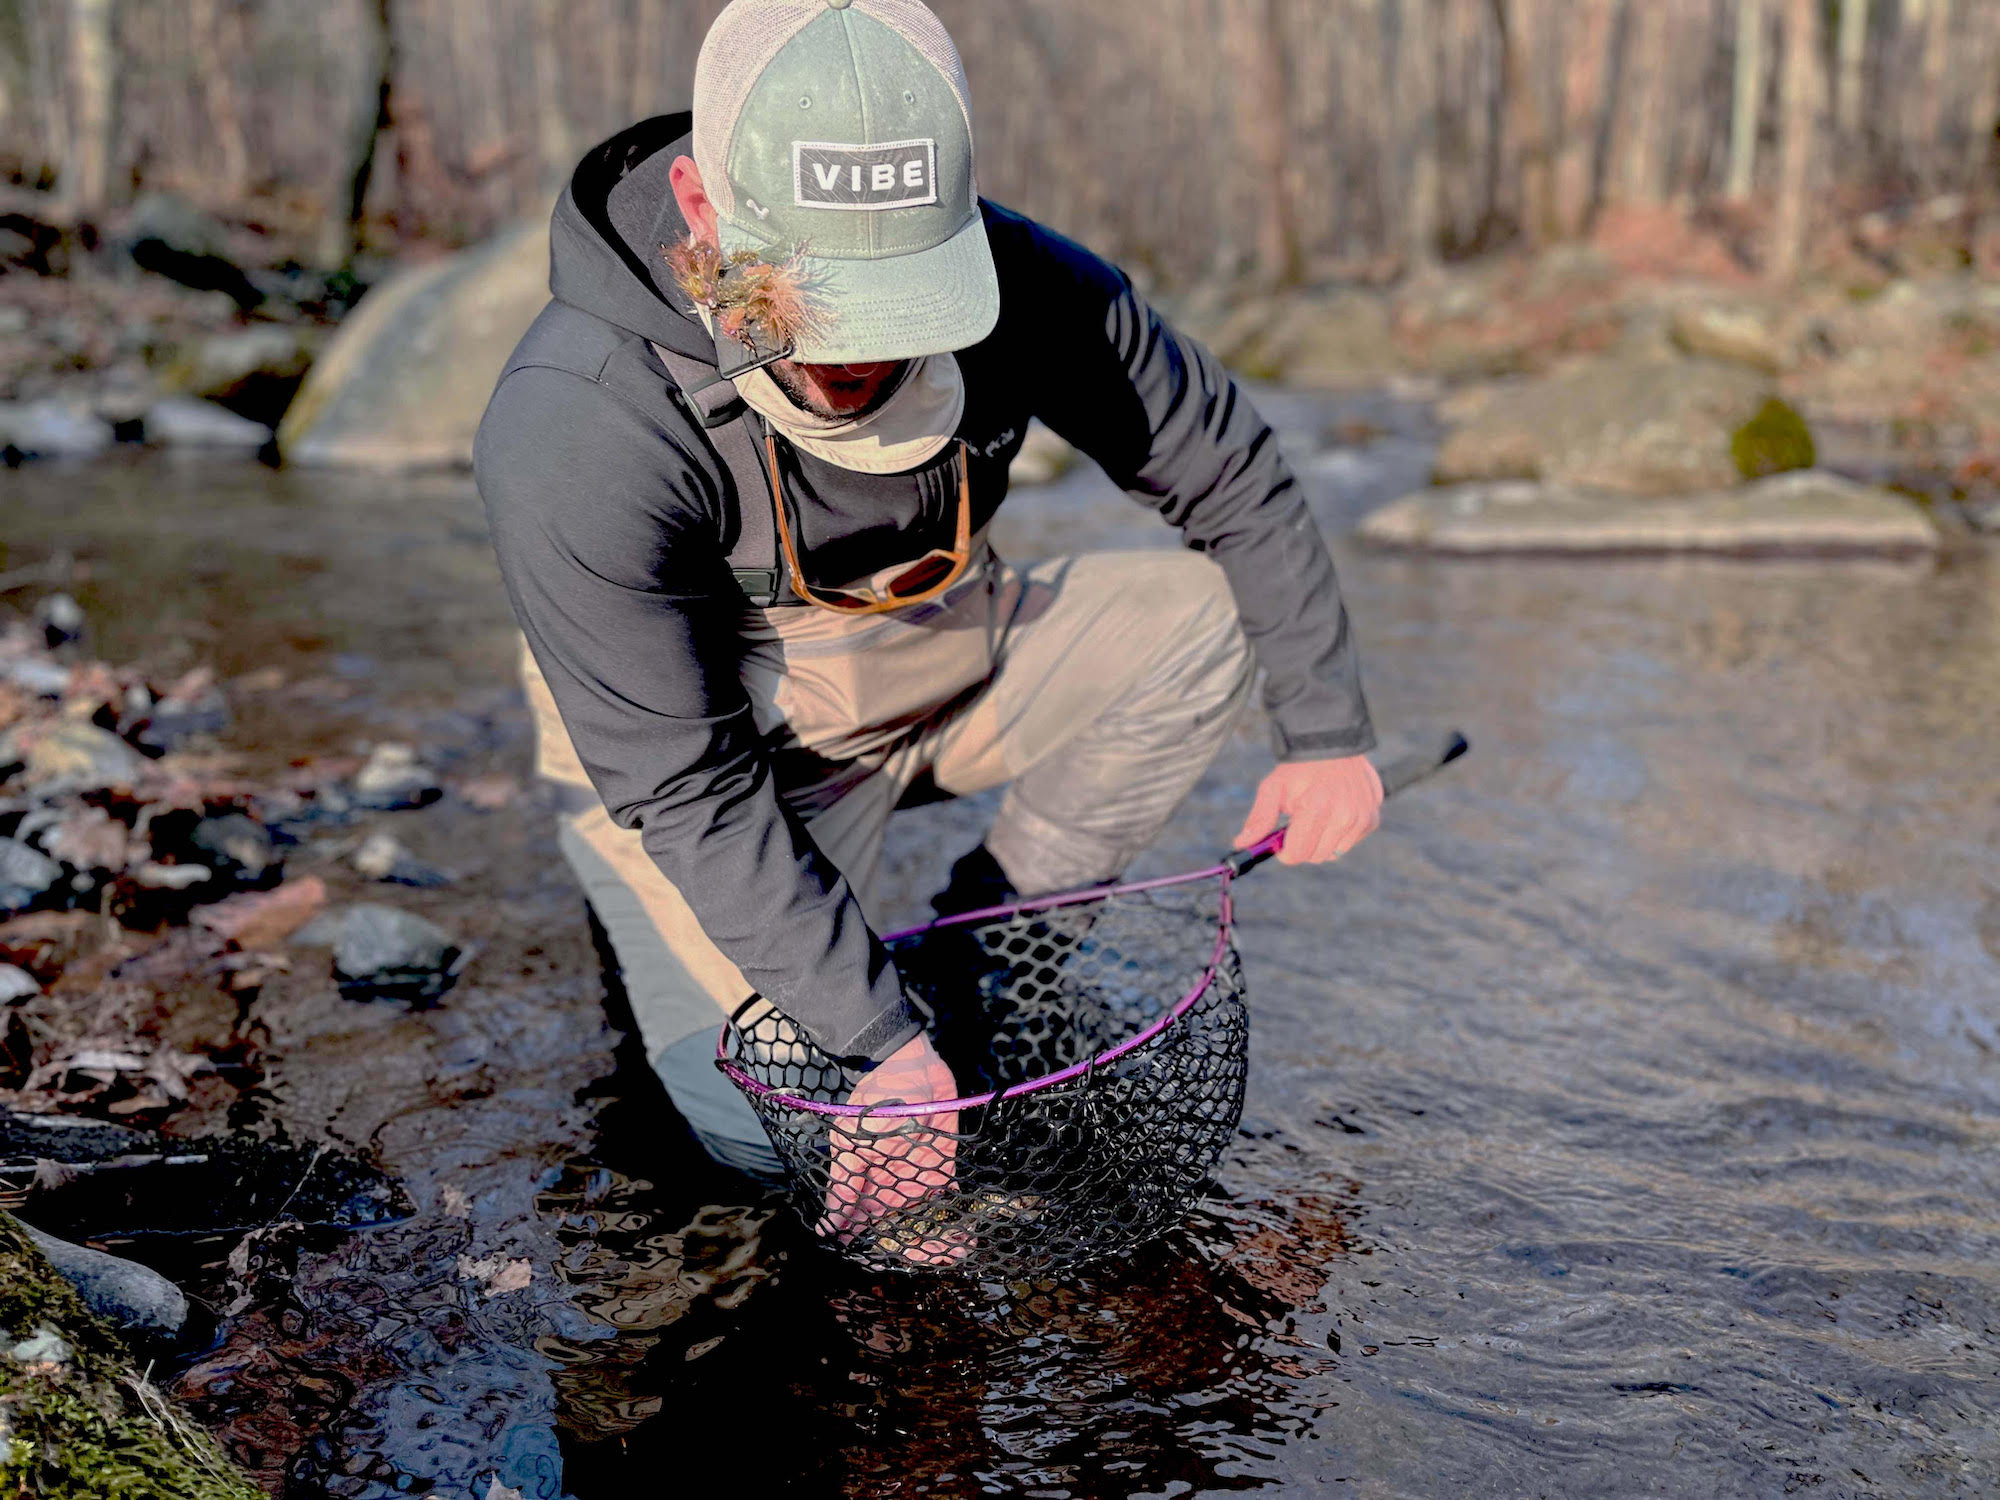 What Are the BEST Fly Fishing Waders? - Podcast Ep. 57 (Untangled